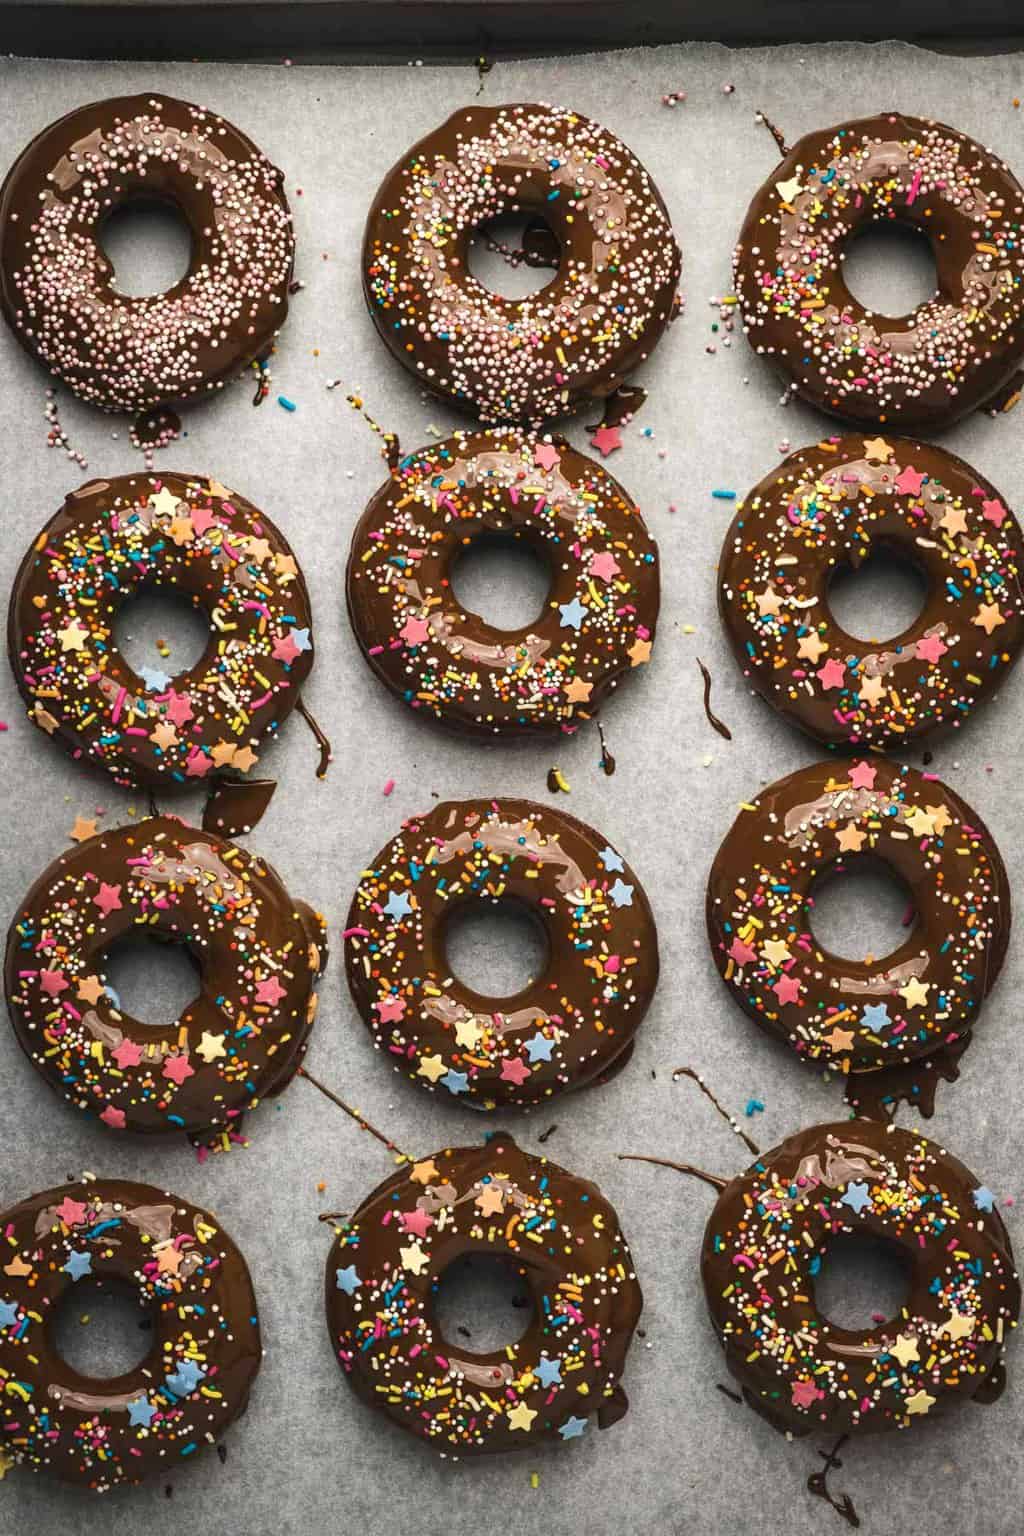 Vegan chocolate donuts topped with melted chocolate and sprinkles on a parchment lined baking tray. 